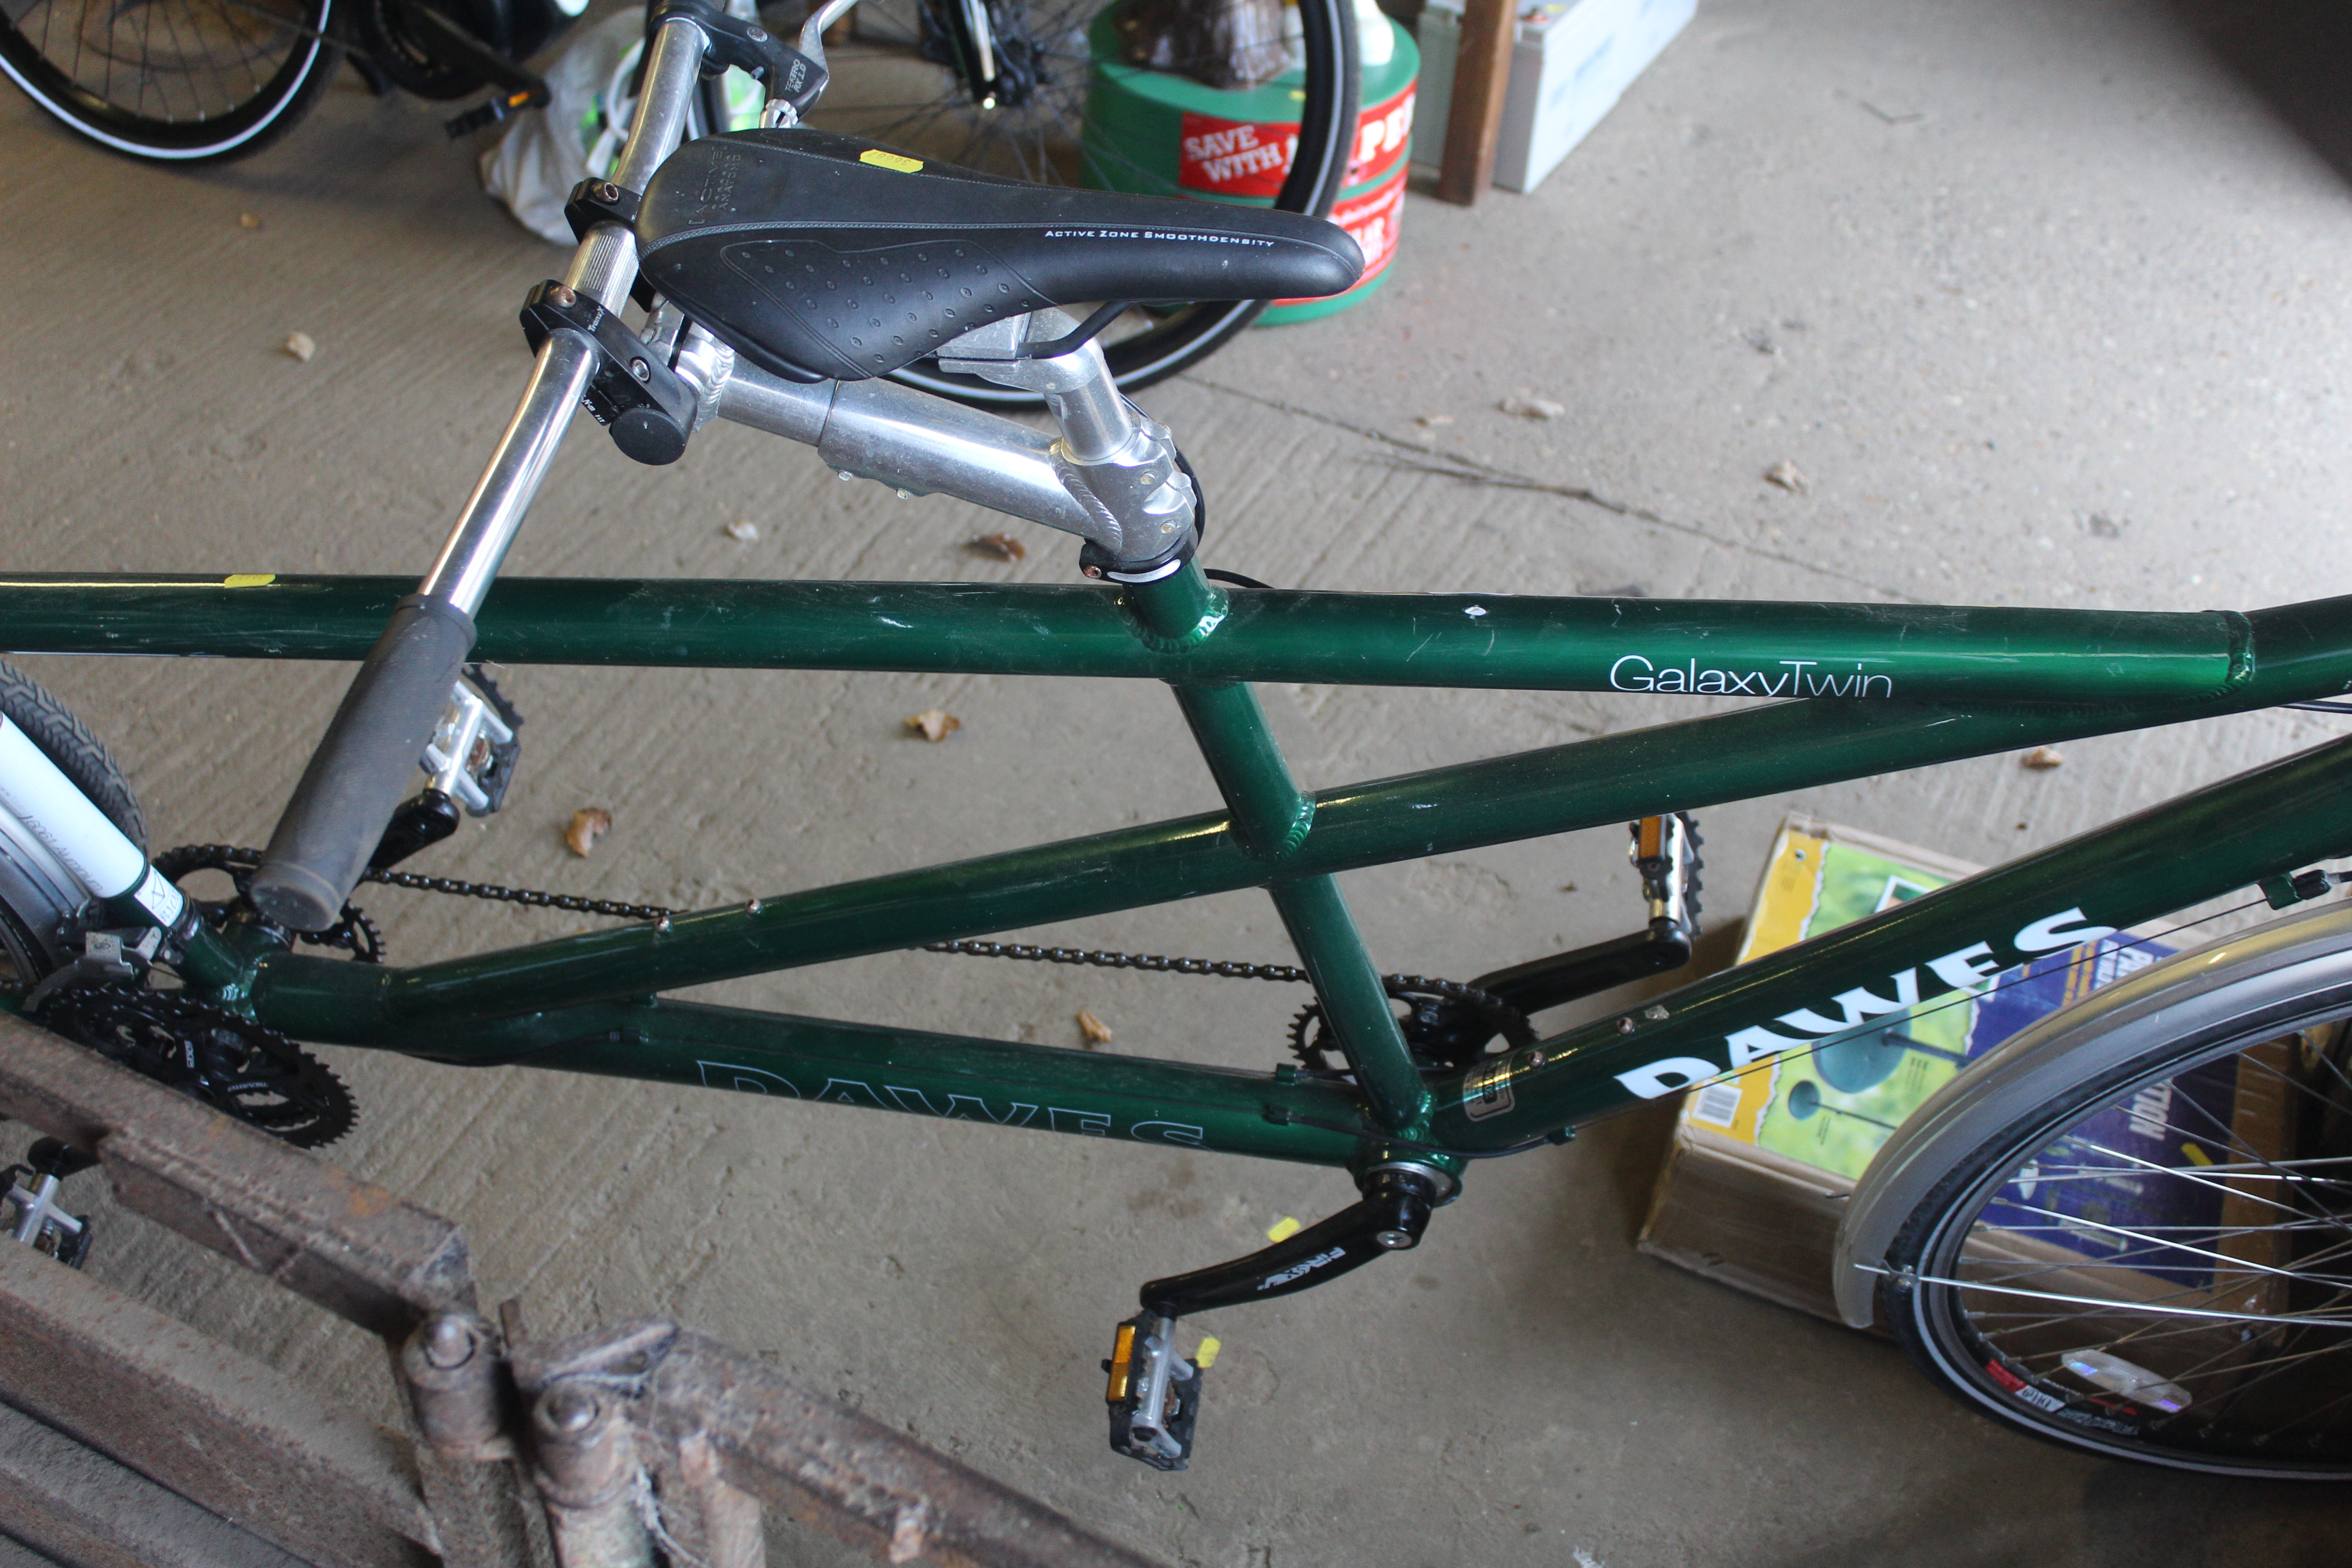 A Dawes GalaxyTwin tandem bicycle with front and r - Image 8 of 9